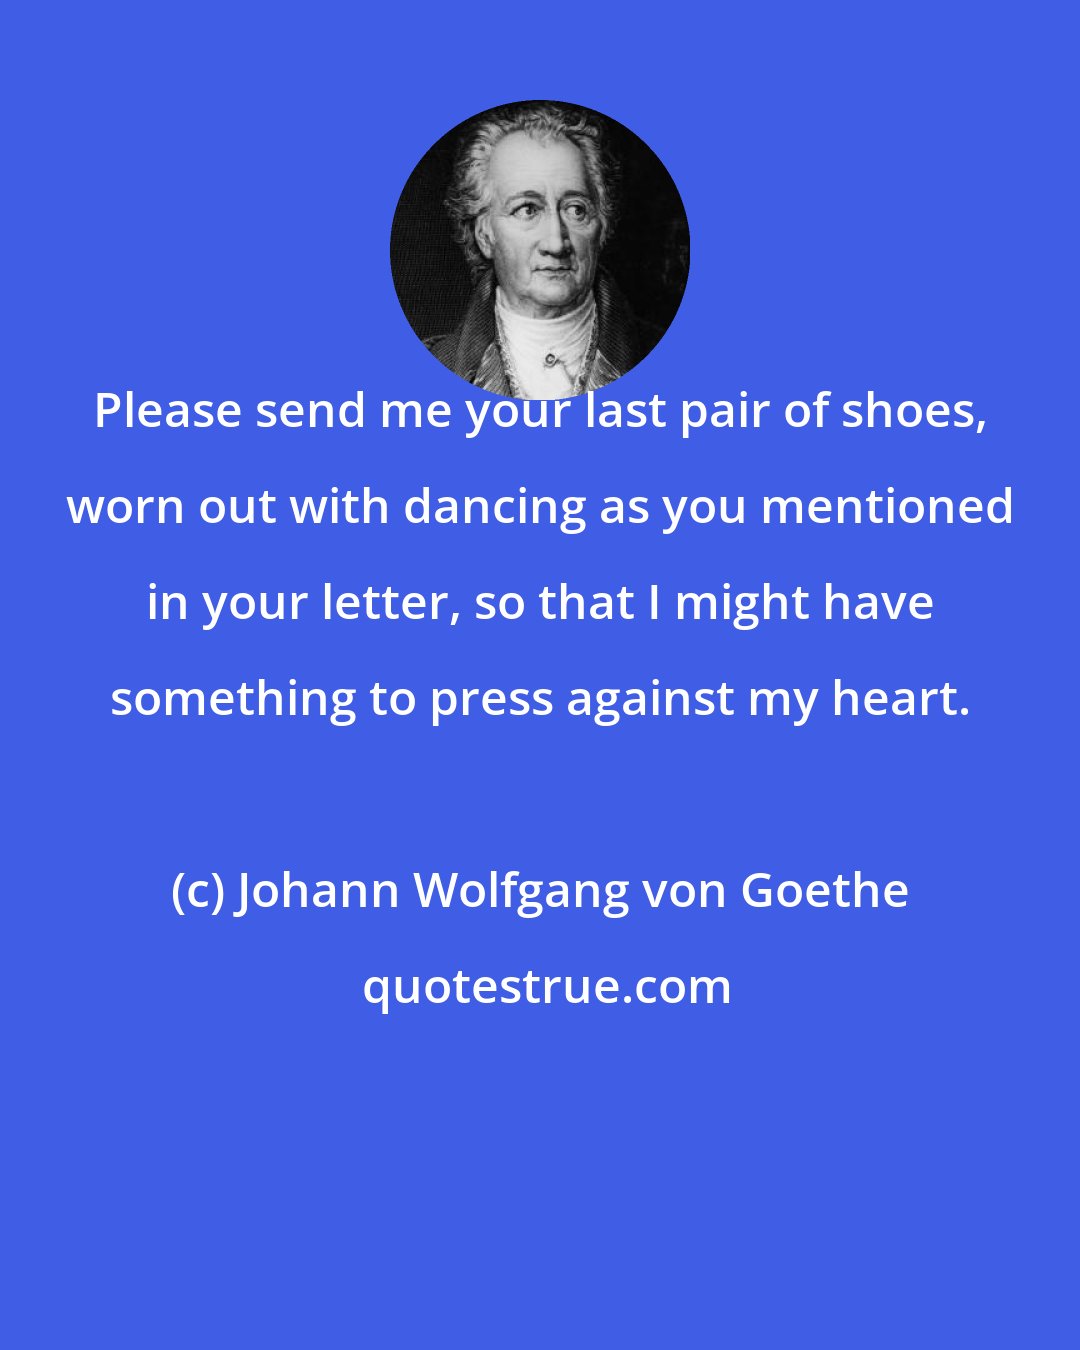 Johann Wolfgang von Goethe: Please send me your last pair of shoes, worn out with dancing as you mentioned in your letter, so that I might have something to press against my heart.